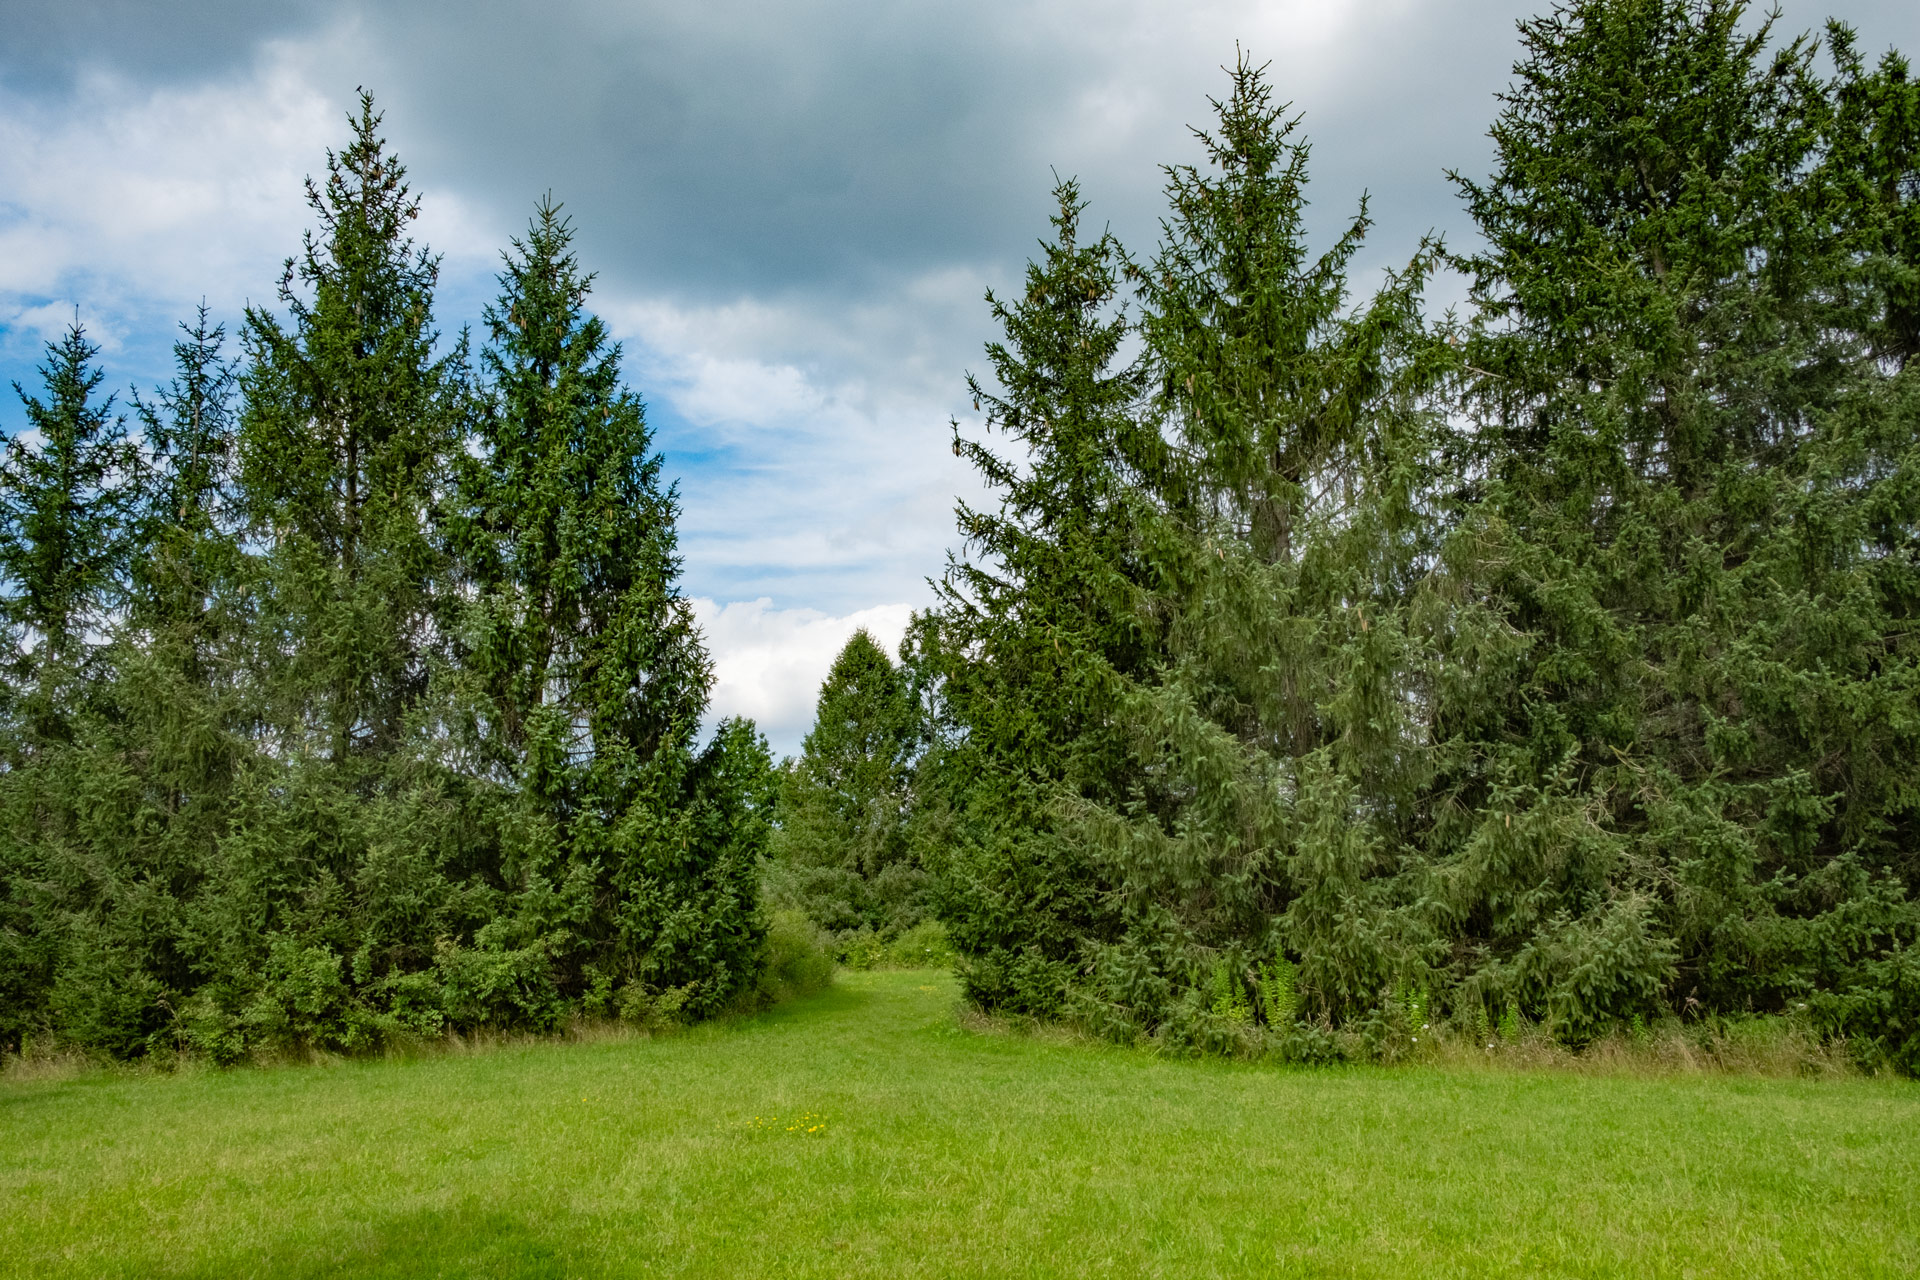 A colour photograph of a line of evergreen trees with an opening to a path.